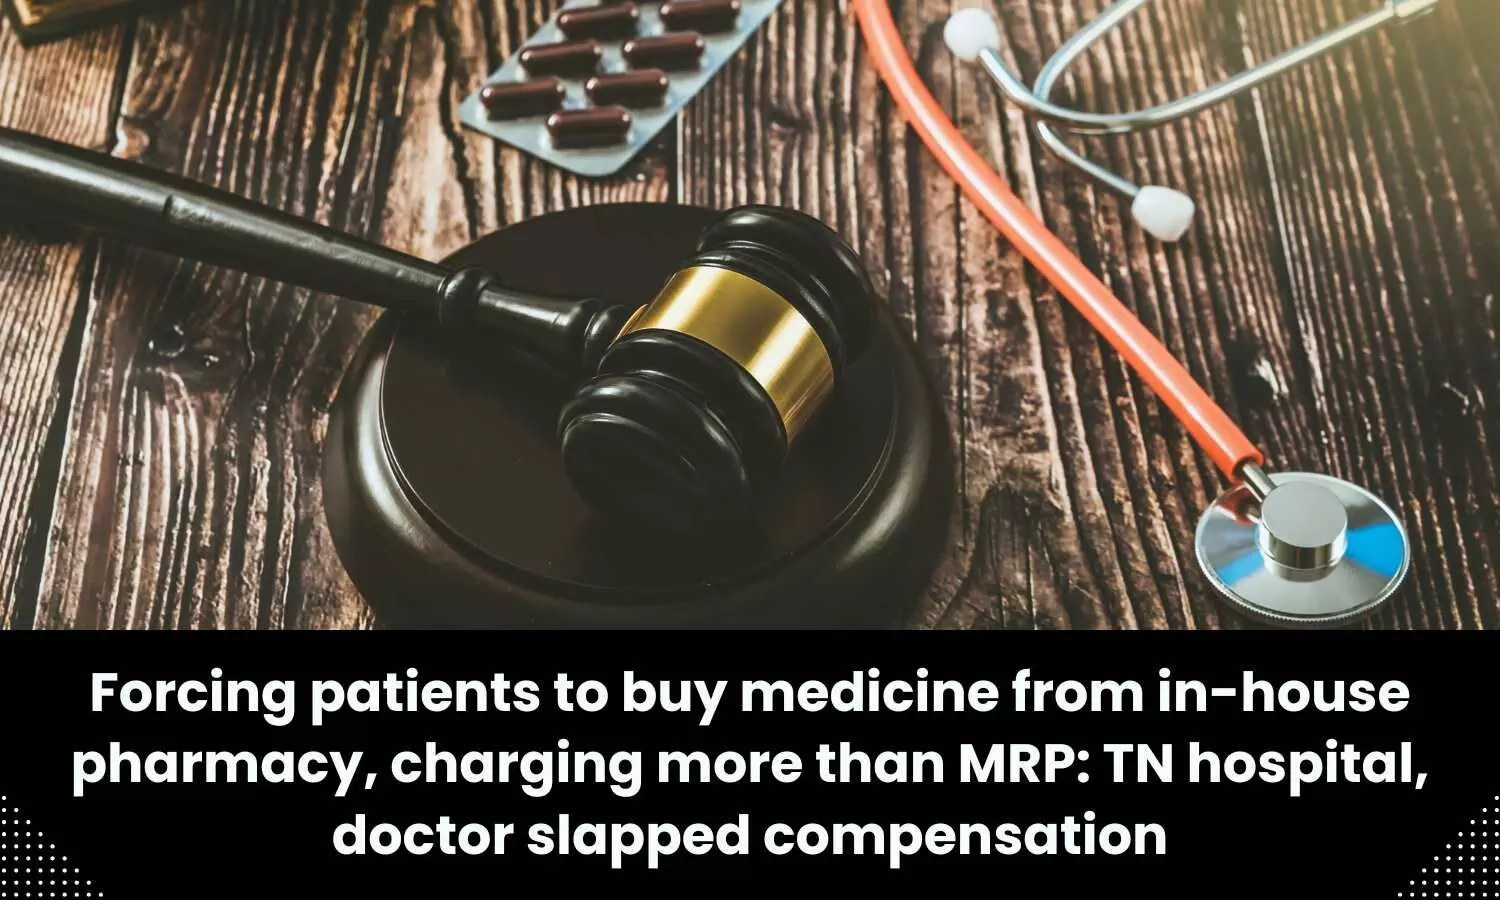 TN Hospital, doctor slapped compensation for forcing patient to buy medicine from in-house pharmacy